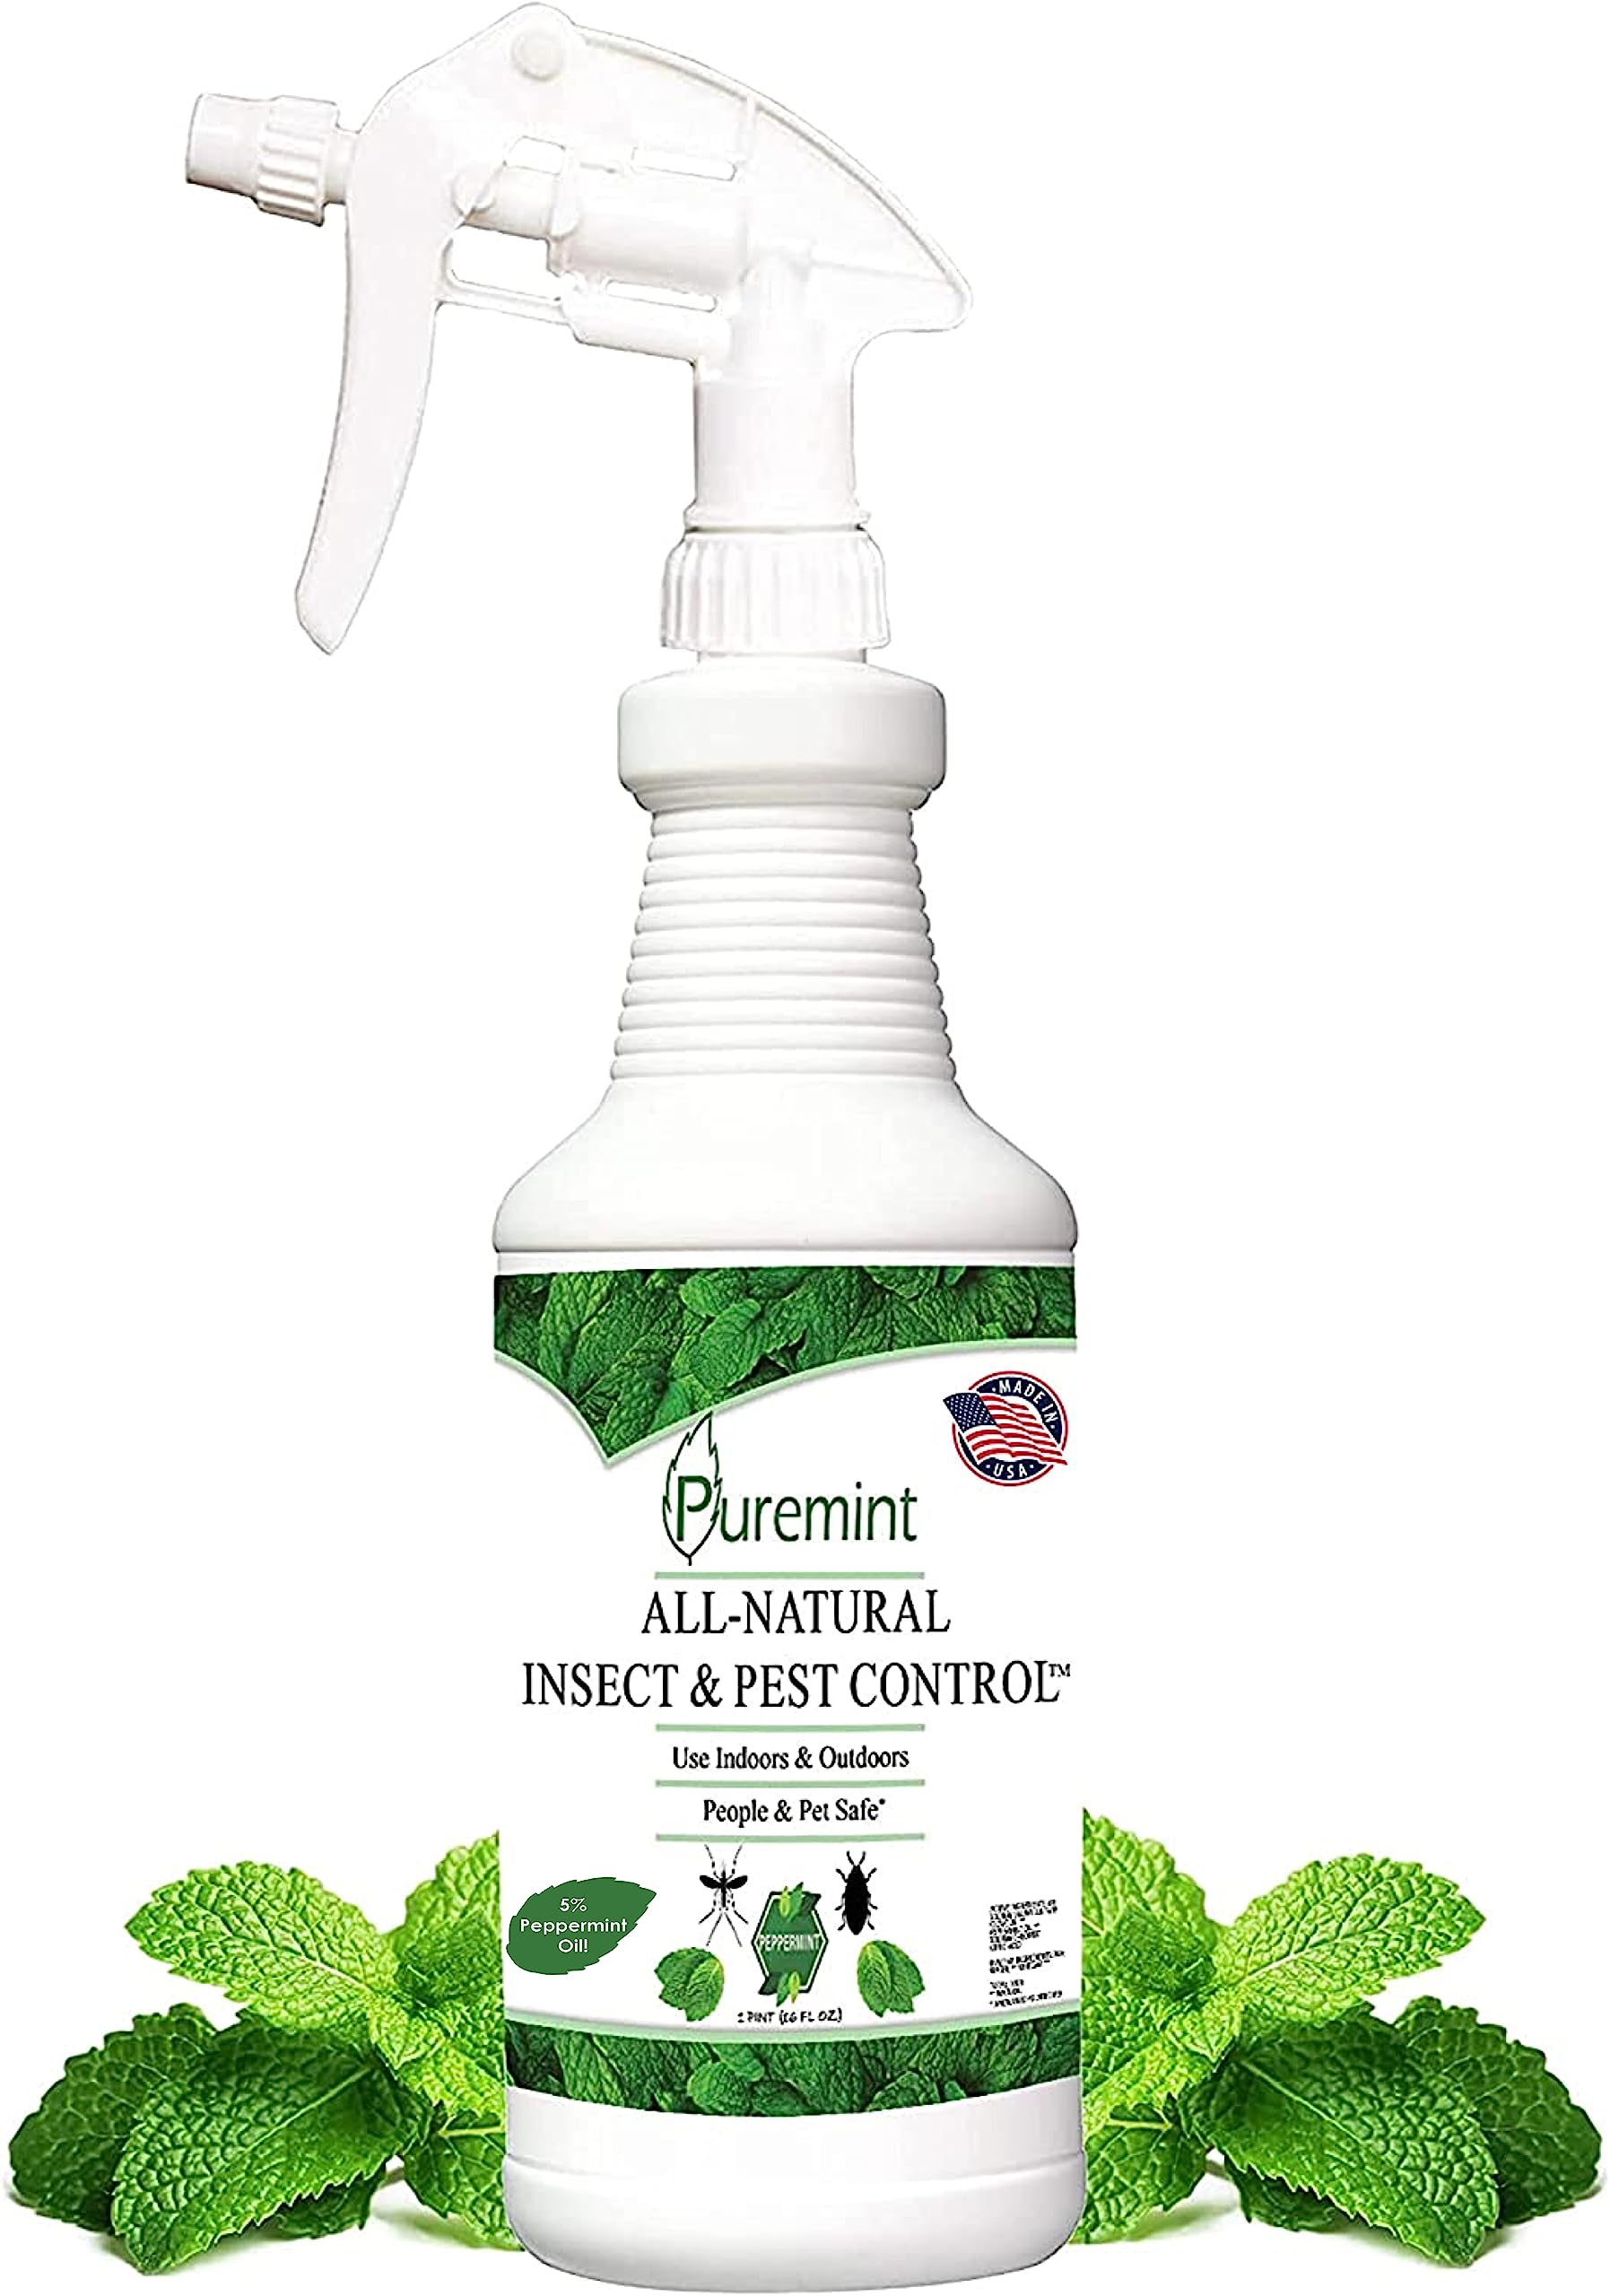 Puremint Insect & Pest Control, Powerful & Natural 5% Peppermint Oil Spray for Ants, Spiders, Bed Bugs, Dust Mites, Roaches and More - Indoor and Outdoor Use, 16 fl oz Pint